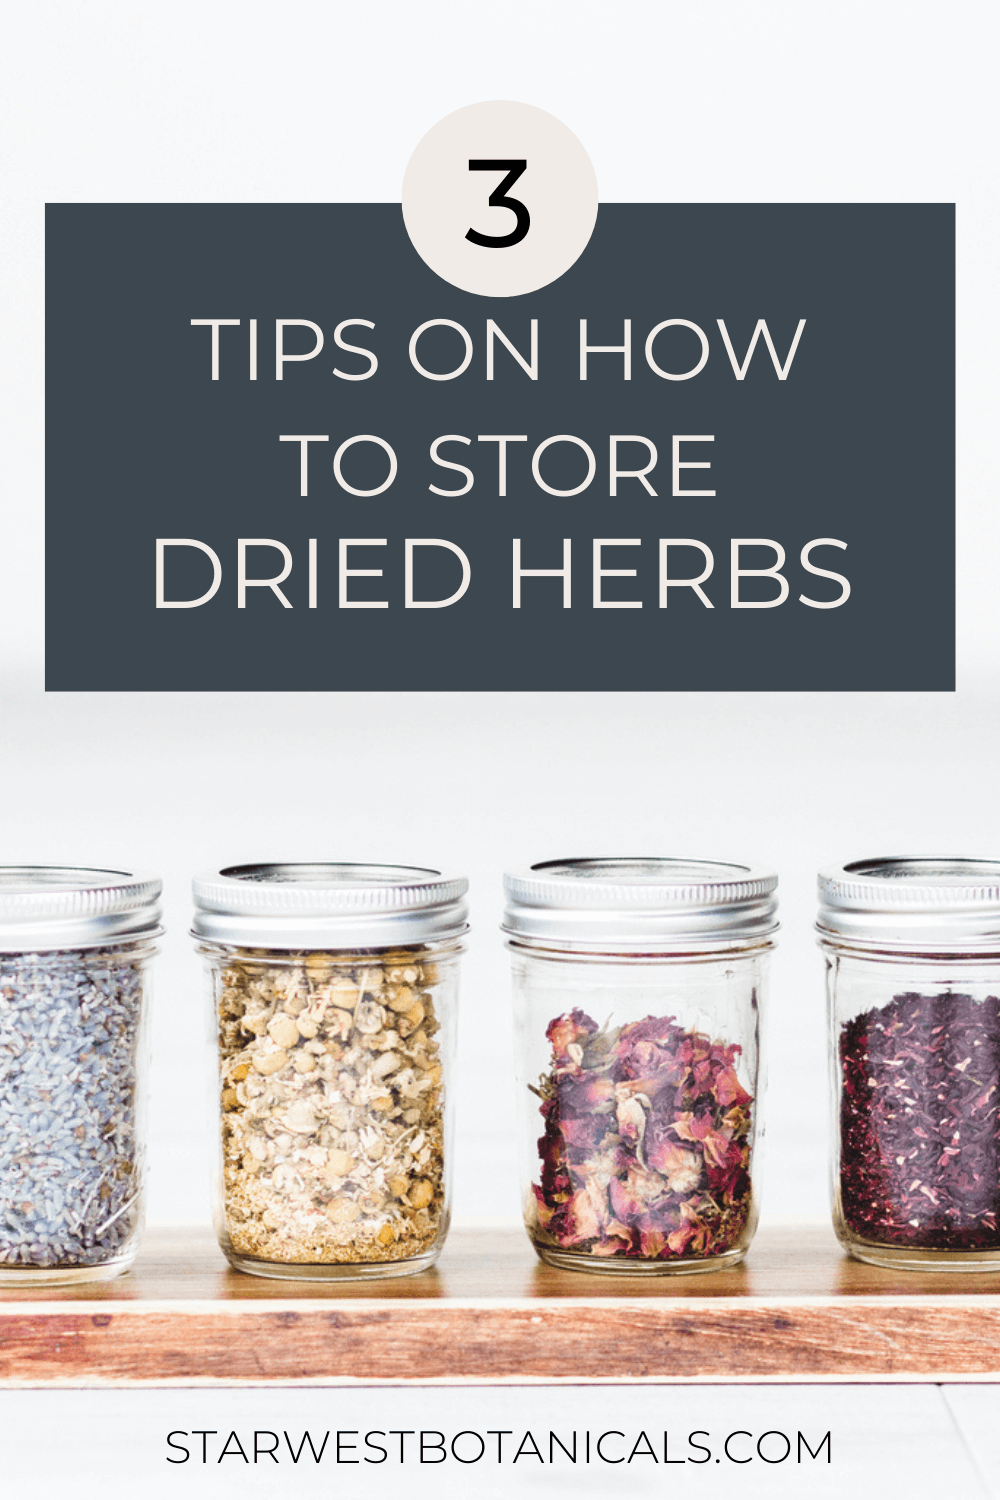 Benefits Of Using Herb / Spice Jars, Racks and Containers